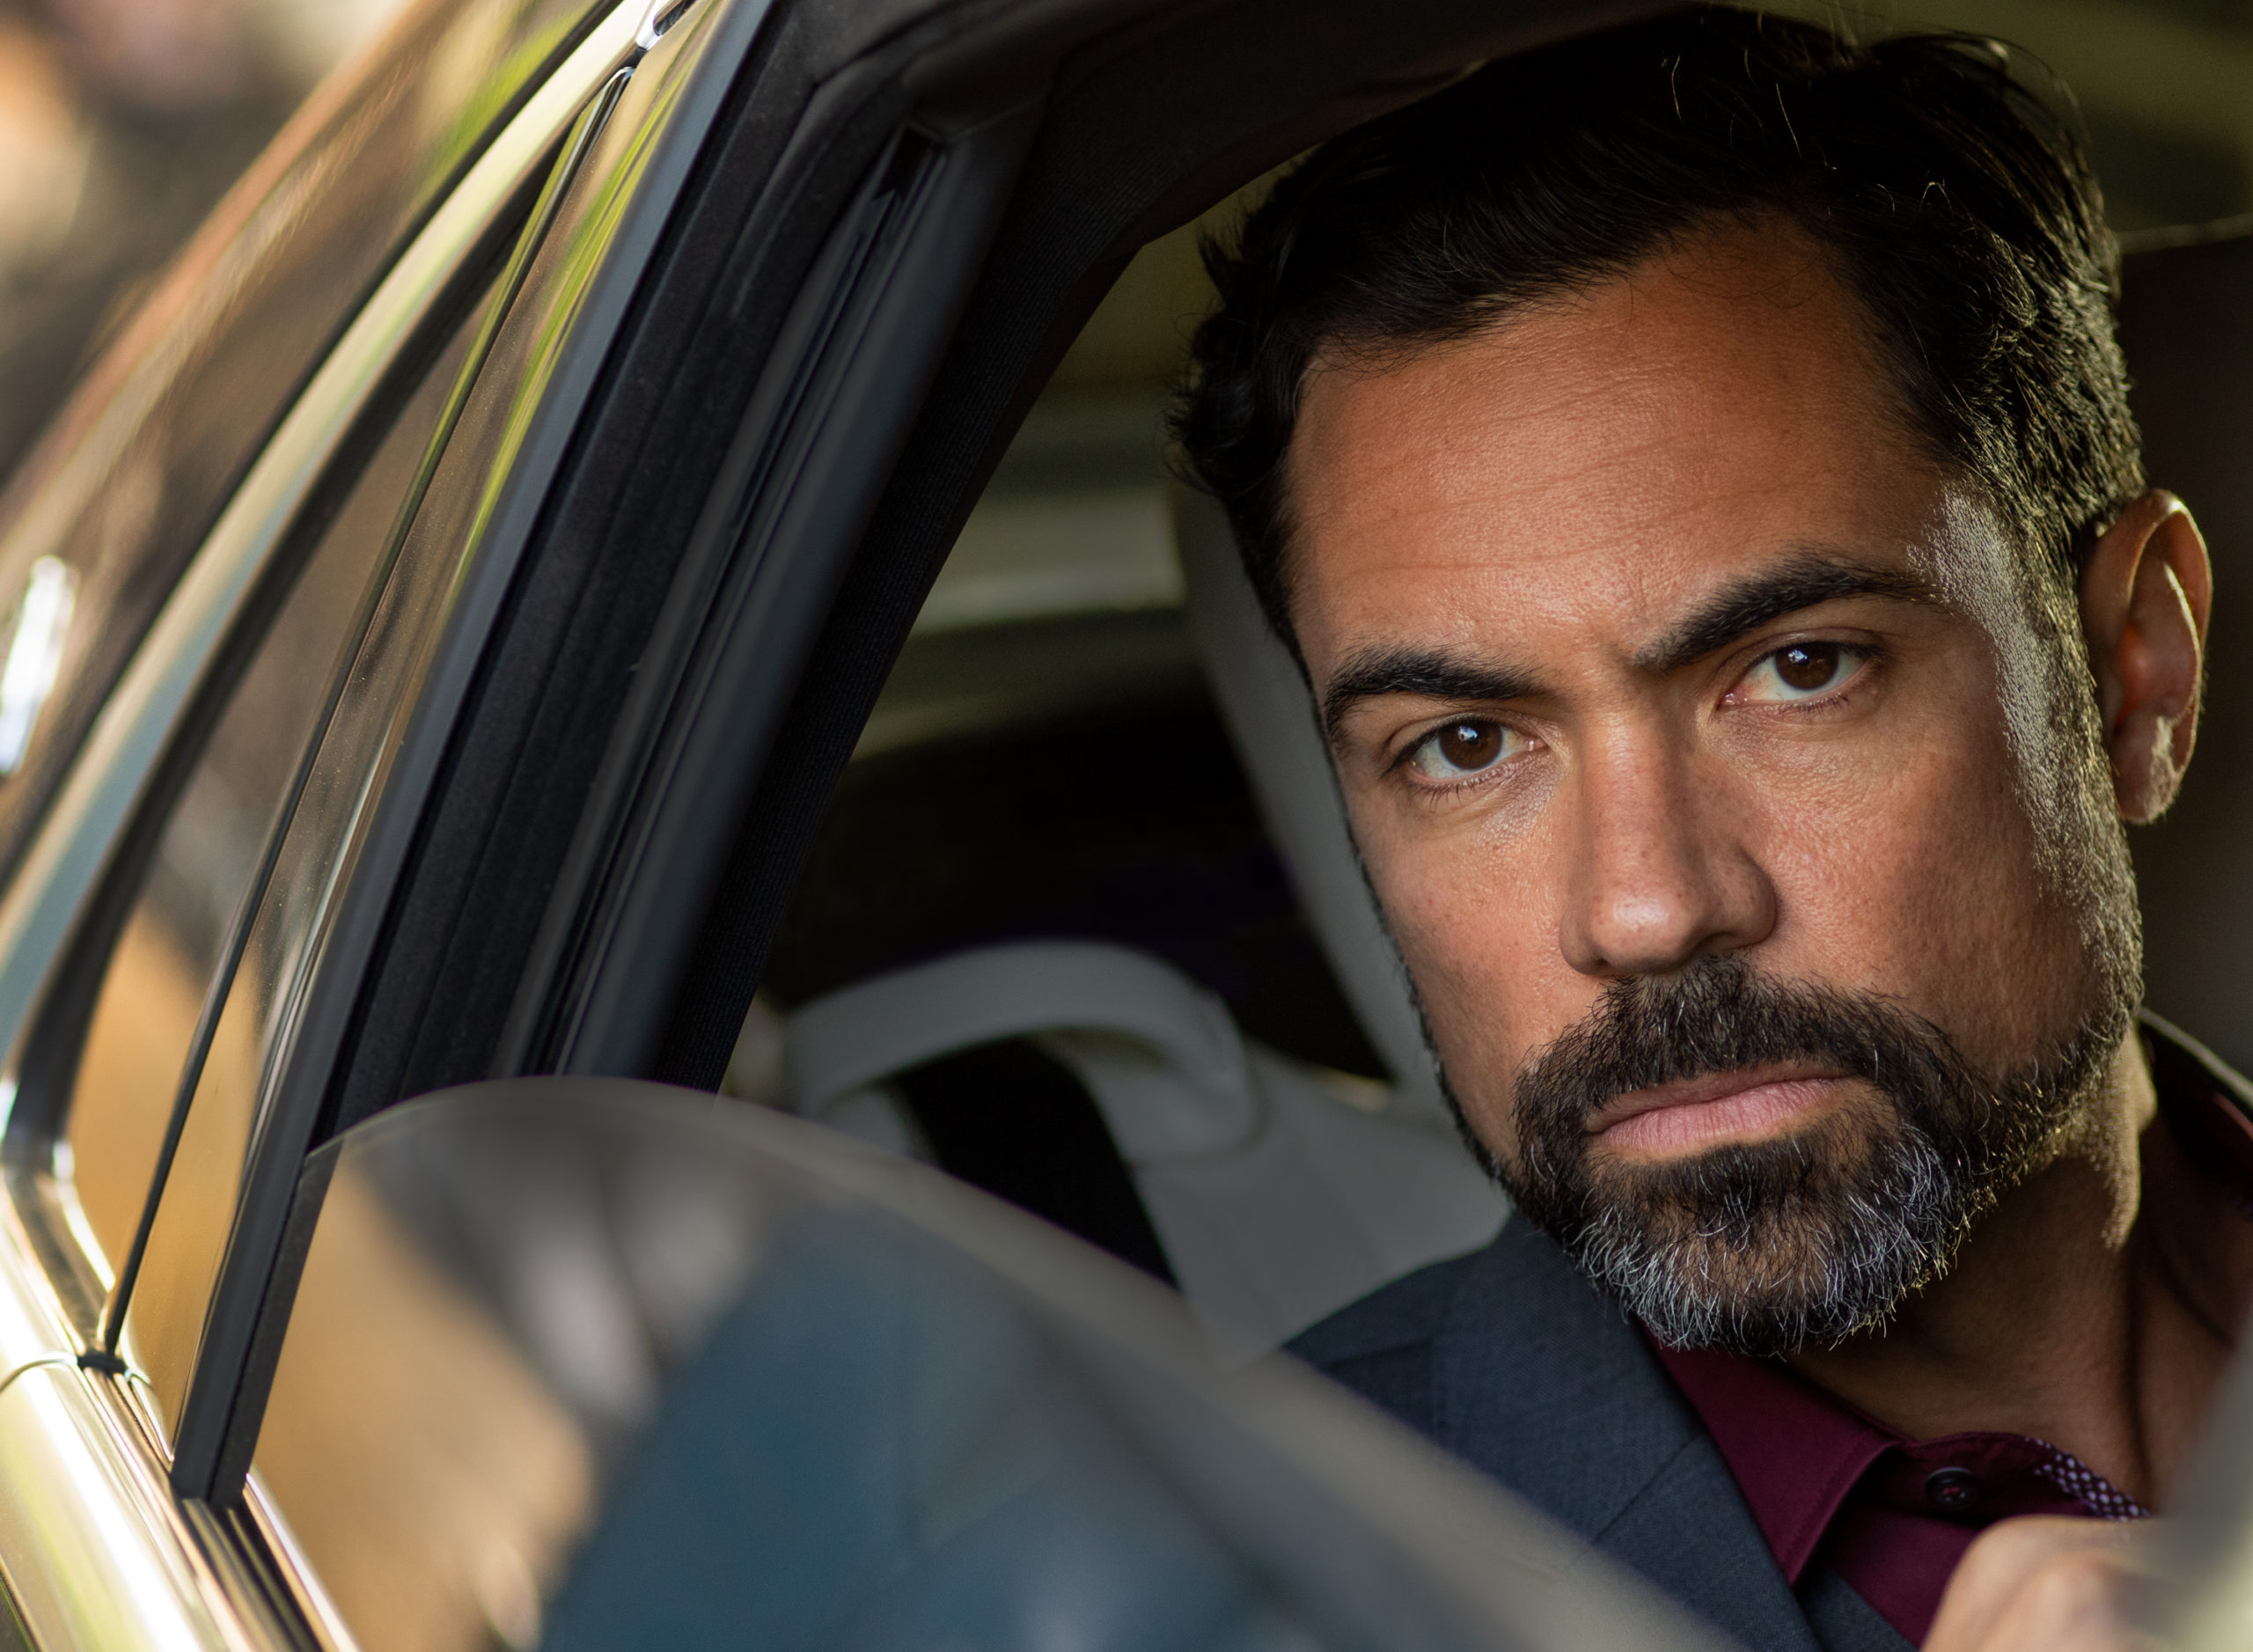 Carla Baratta And Danny Pino Talk About An Explosive Season Three Of FX’s Mayans M.C. [Exclusive Interview]